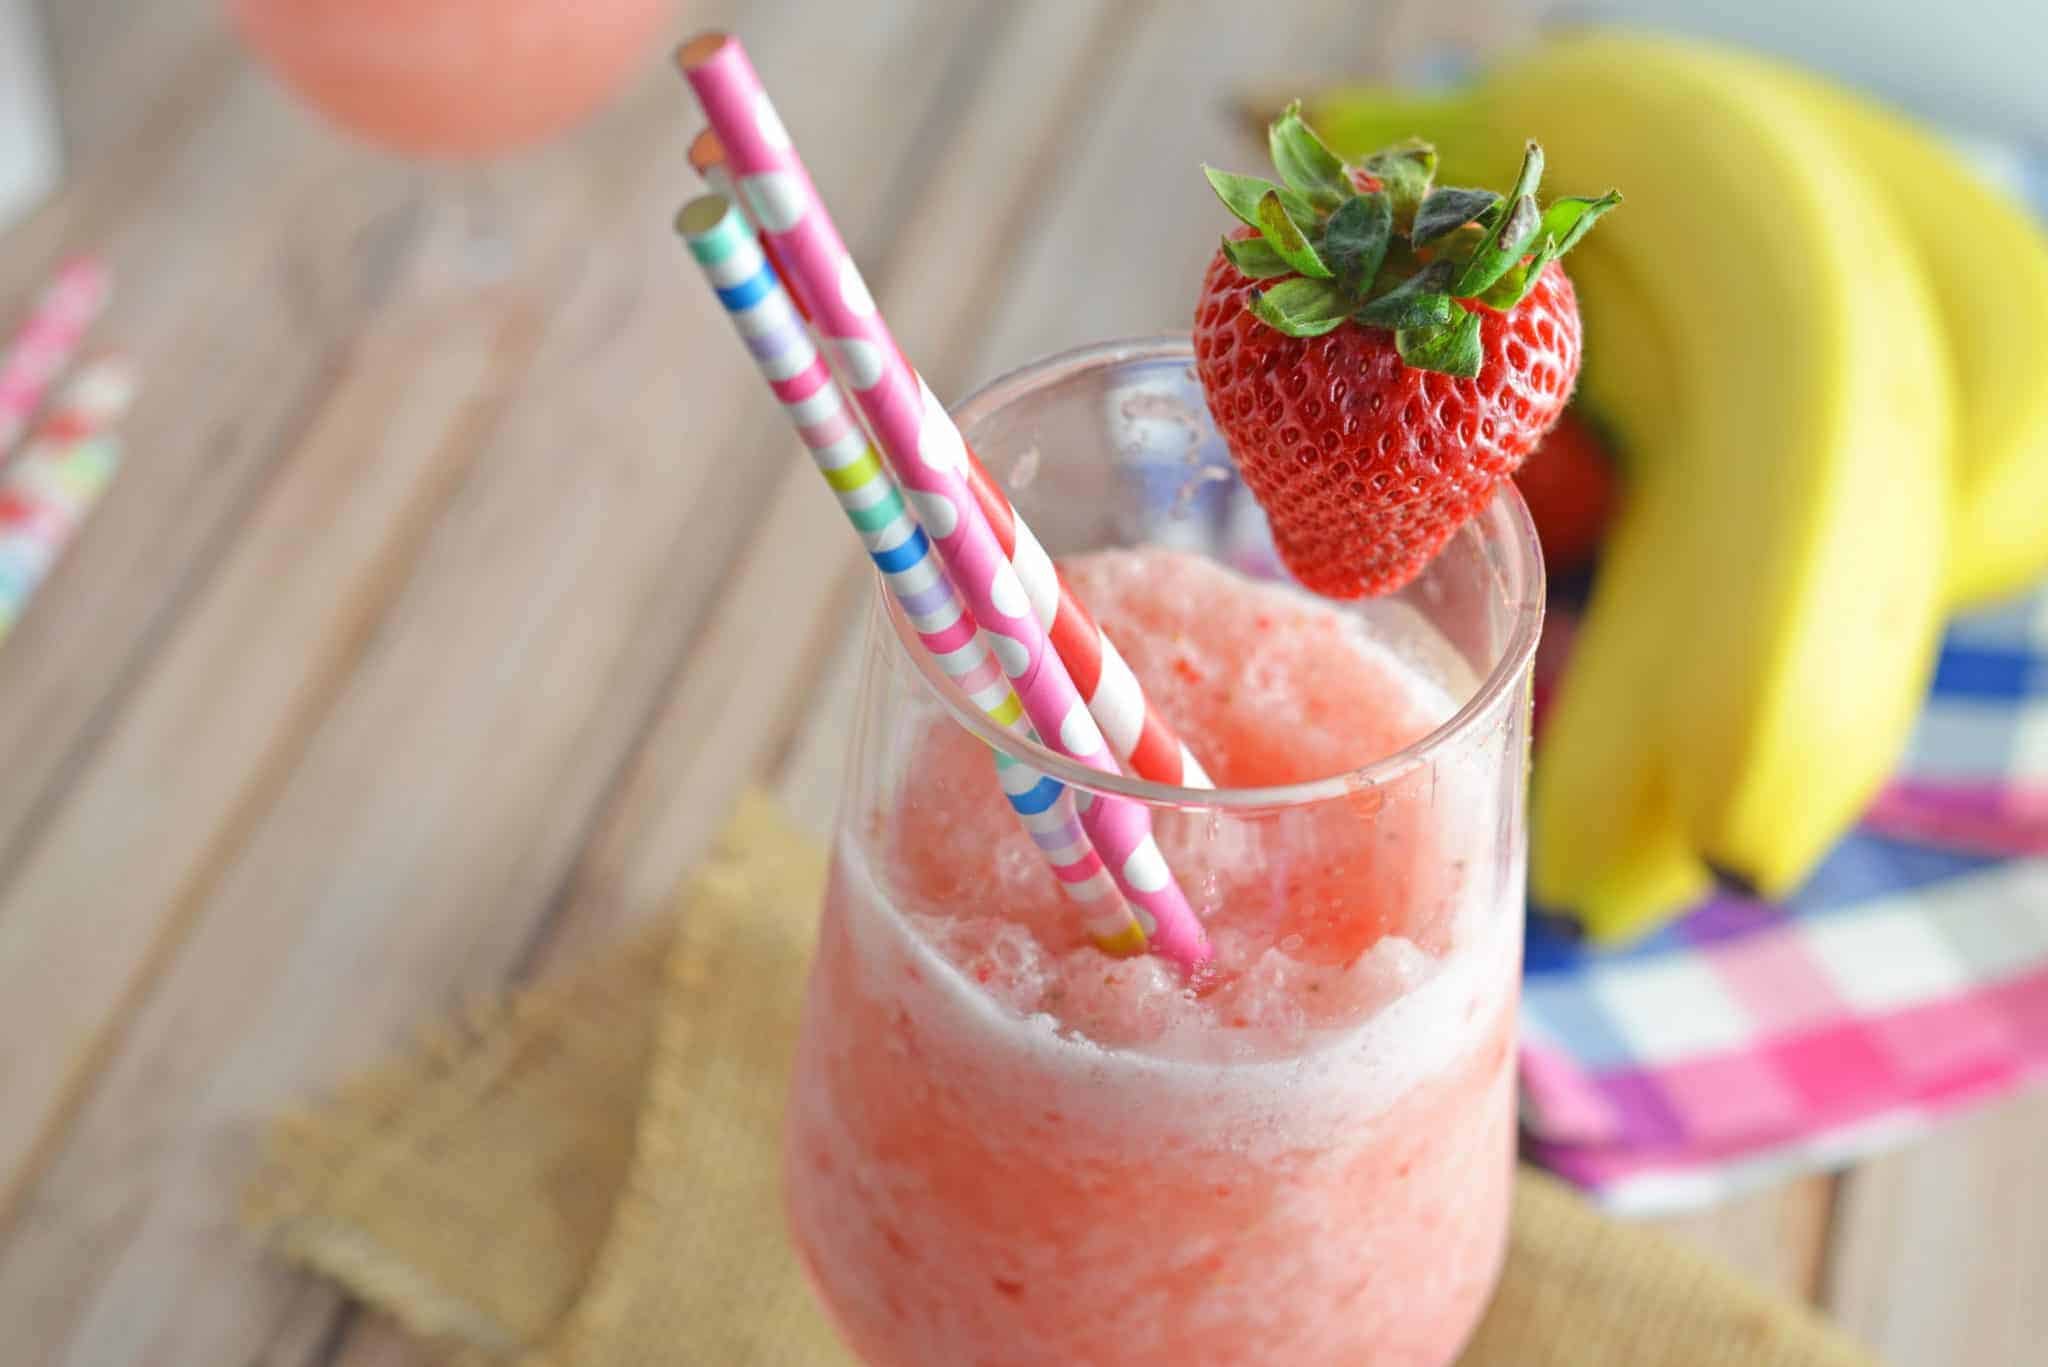 Strawberry BBC Frozen Drink – Fresh strawberries, banana, Bailey’s and coconut make up my FAVORITE frozen drink. Every time I throw a party, people request this beverage! www.savoryexperiments.com